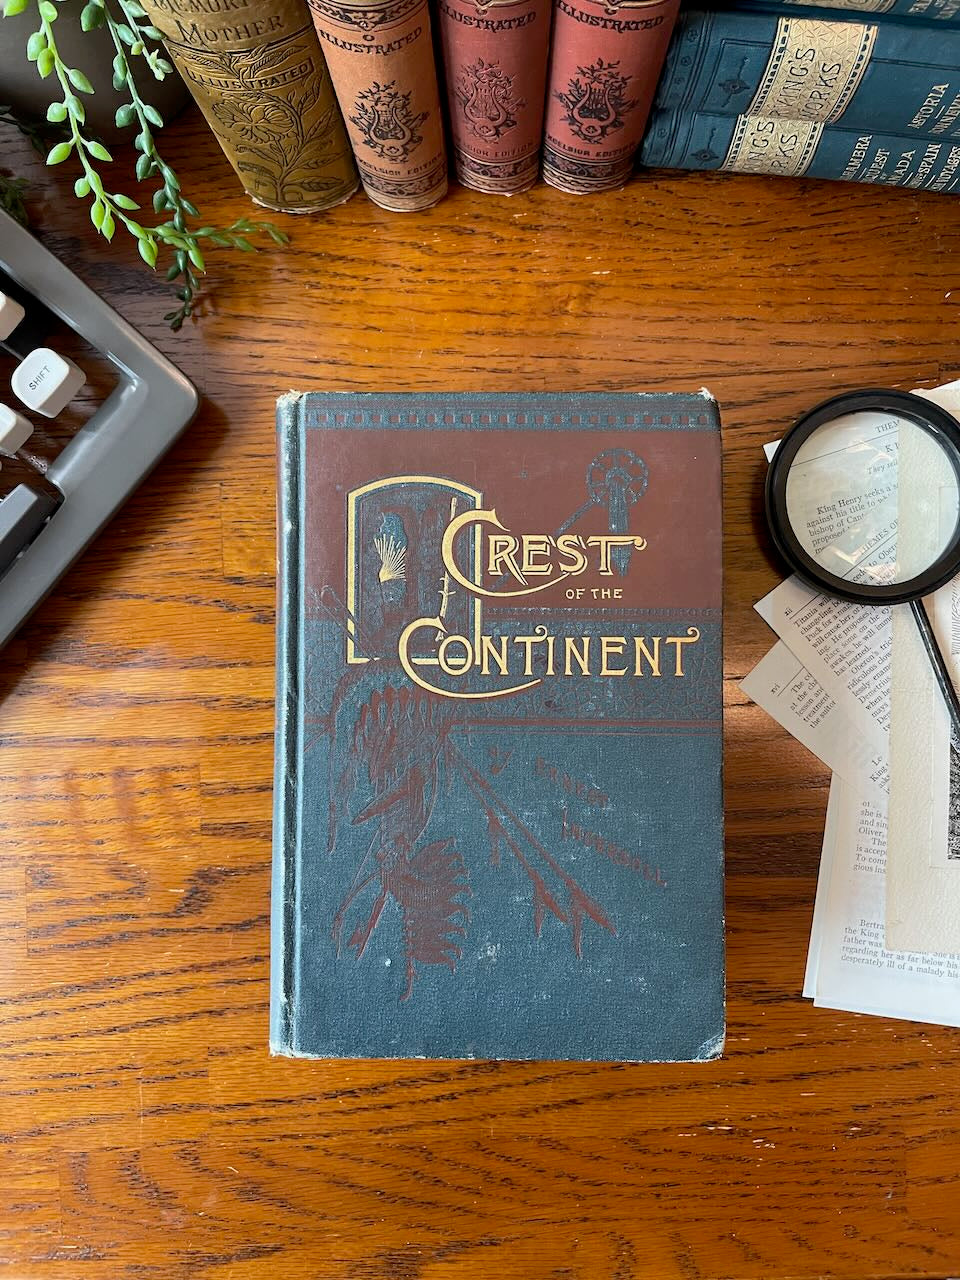 The Crest of the Continent / 1885 - Precious Cache